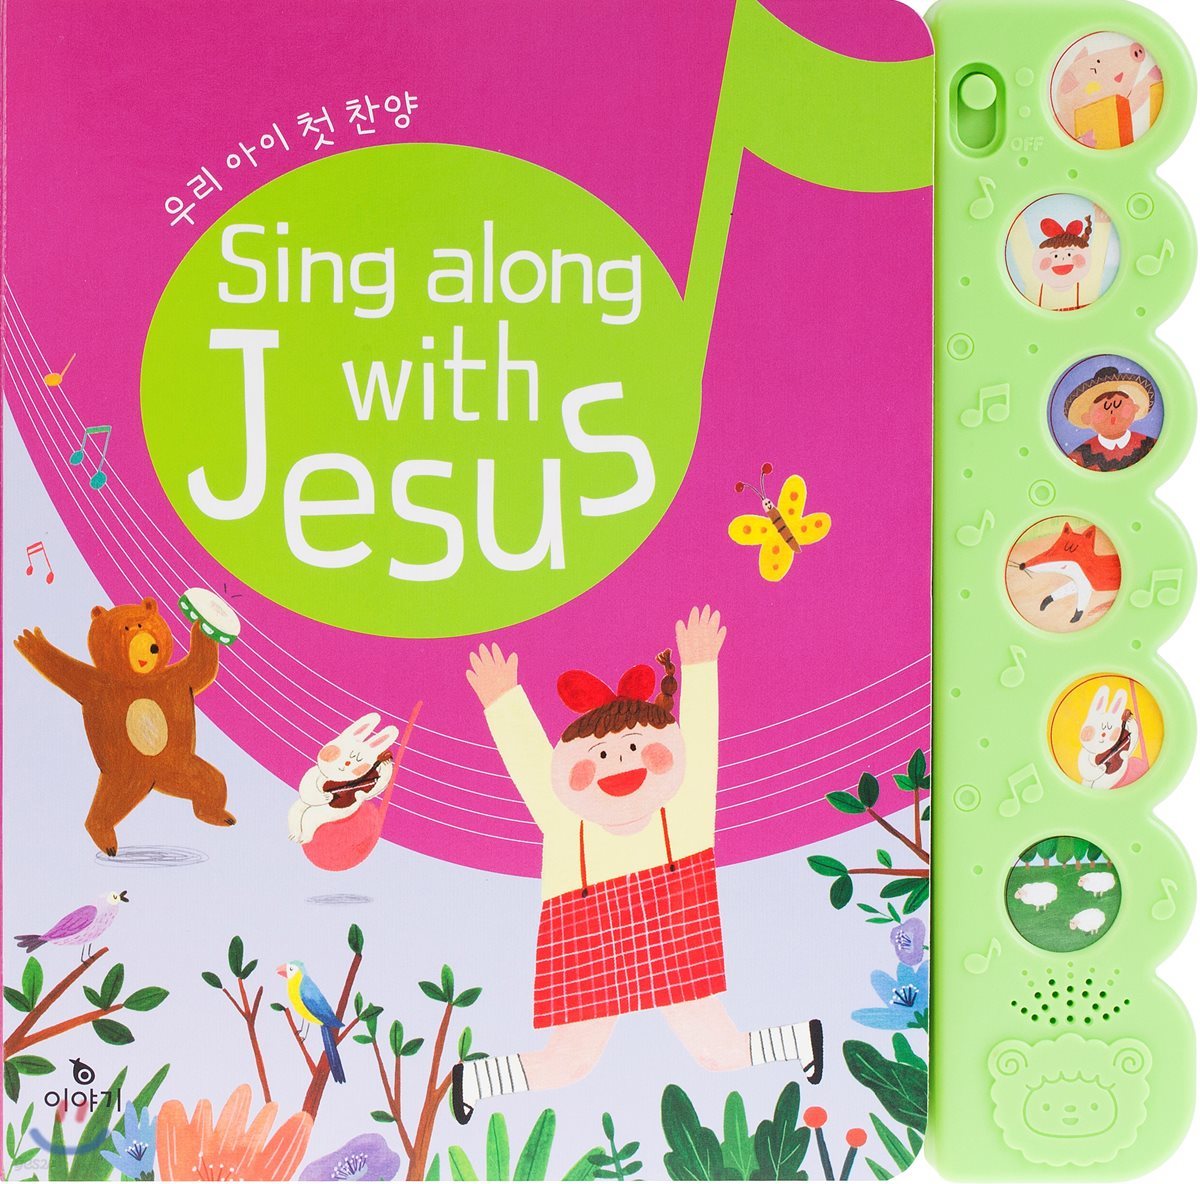 Sing along with Jesus